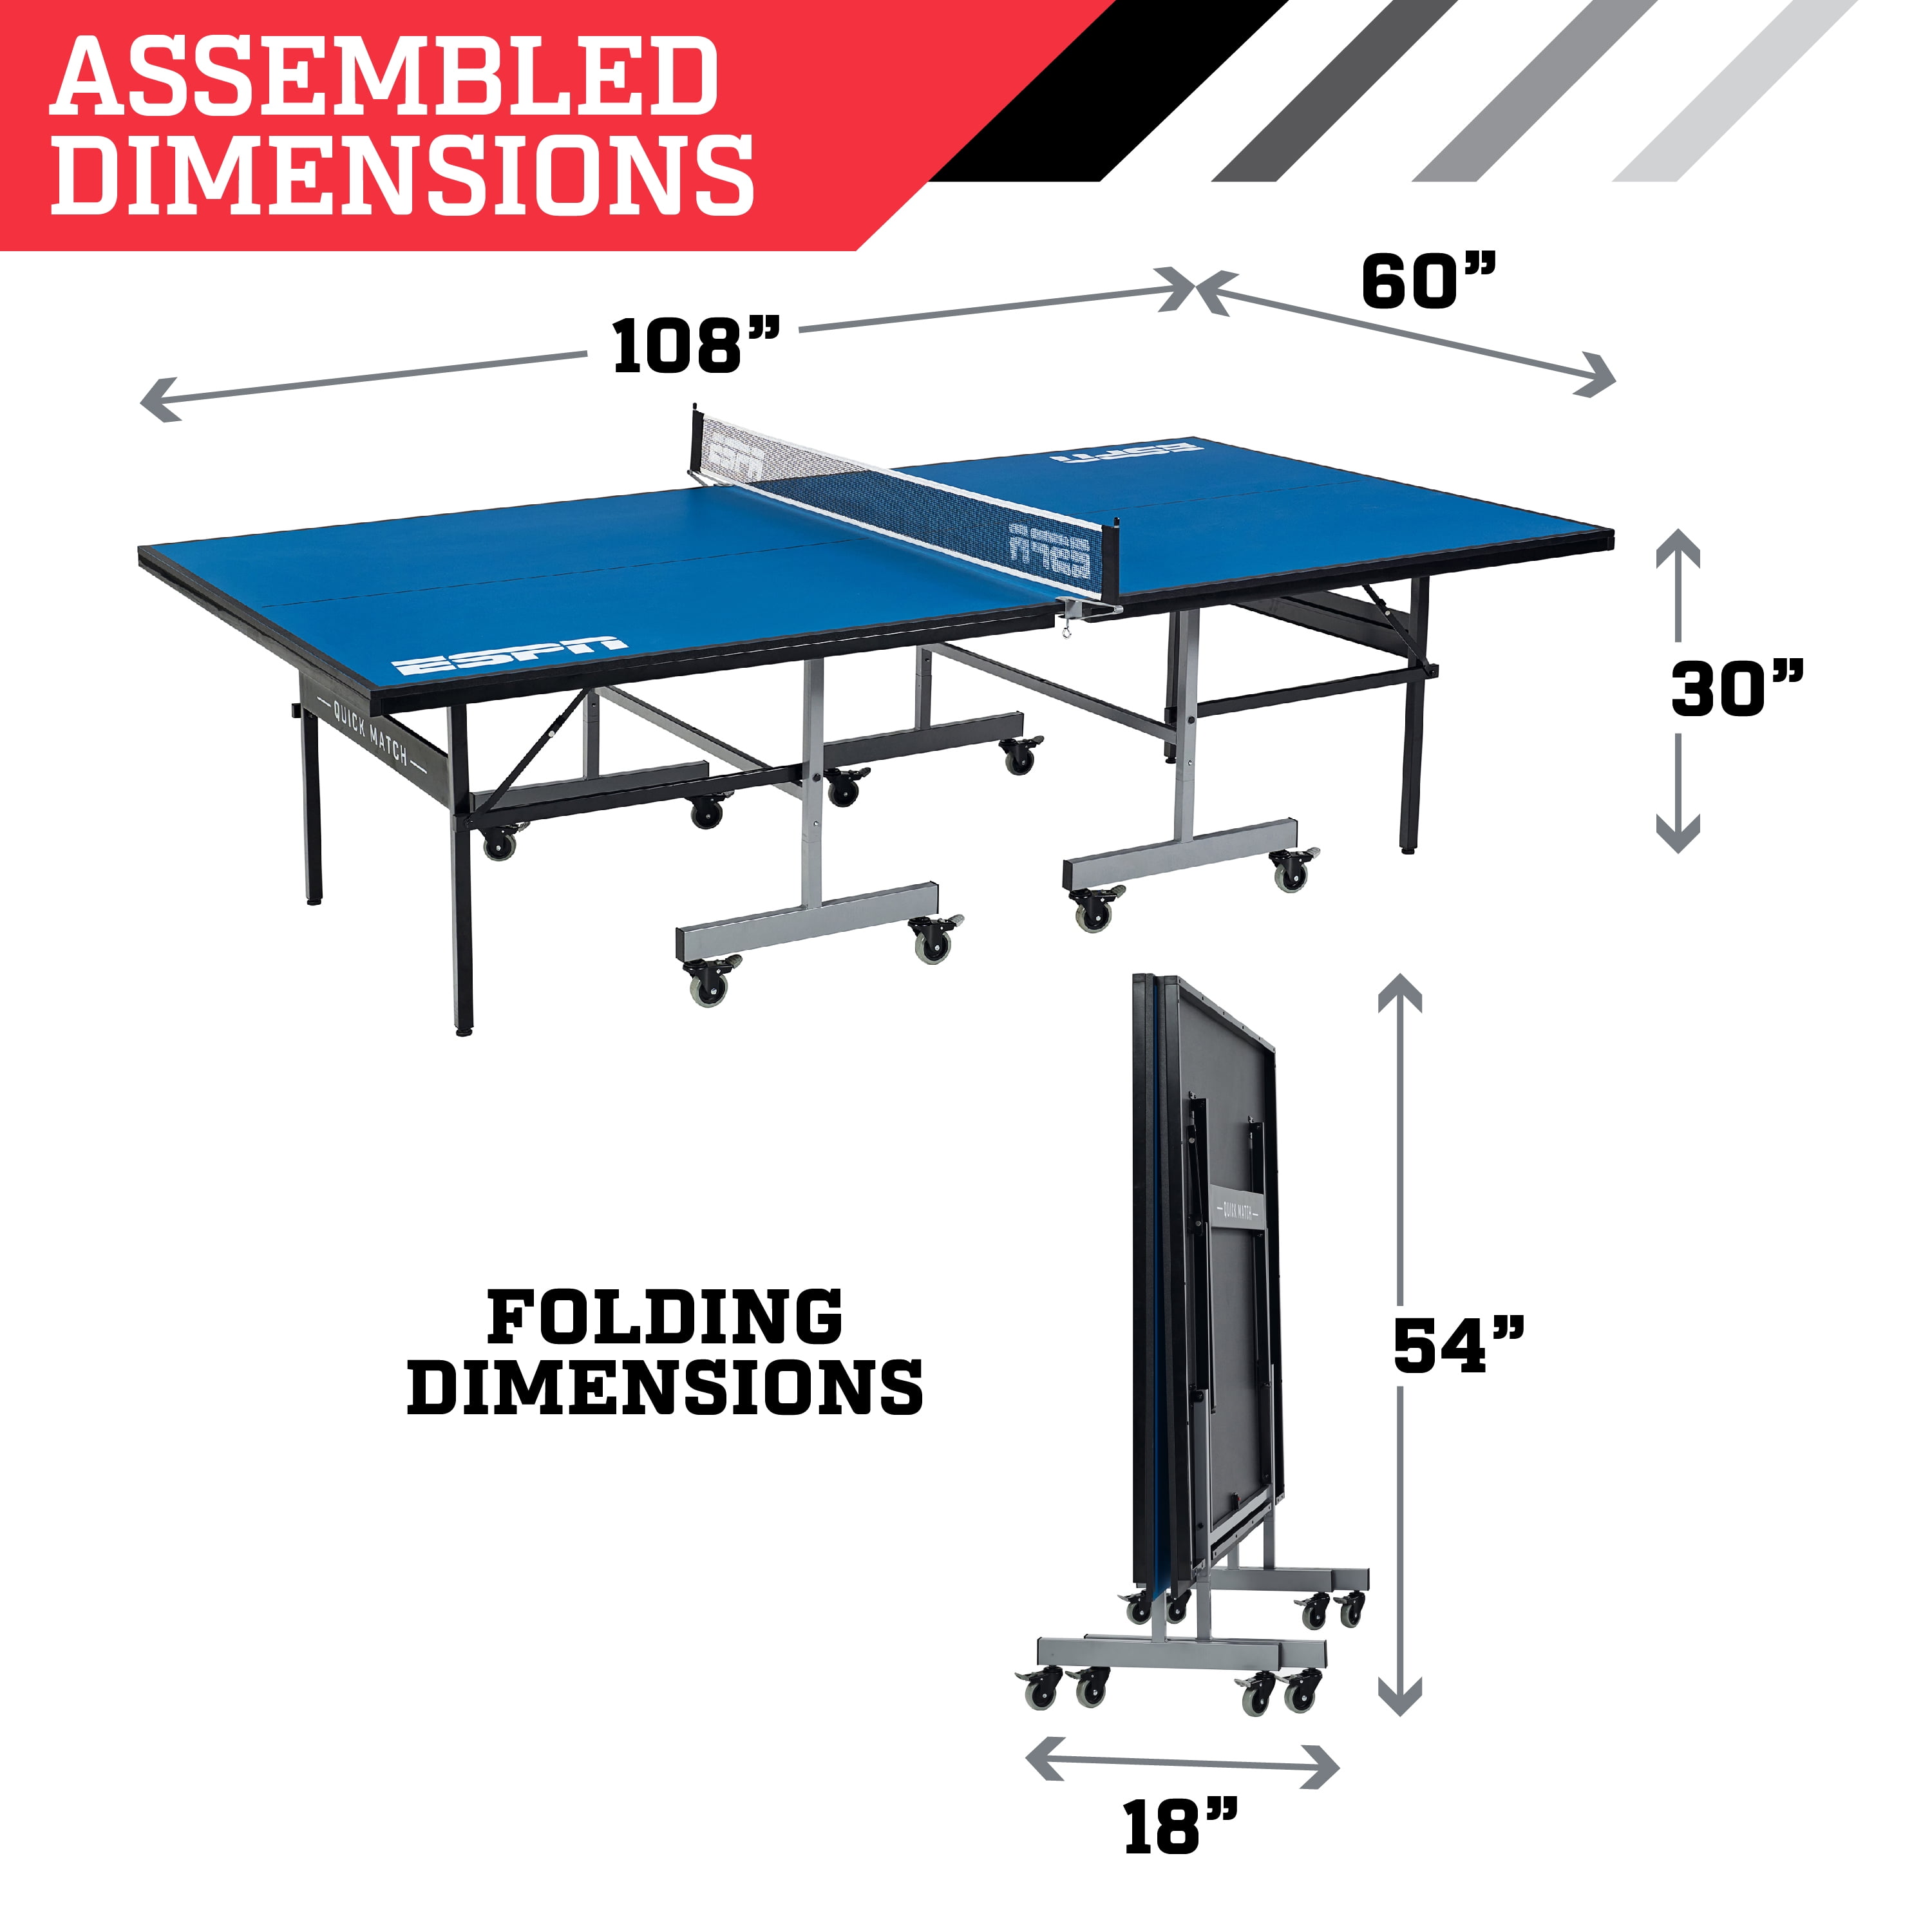 To choose the right table tennis table size for you